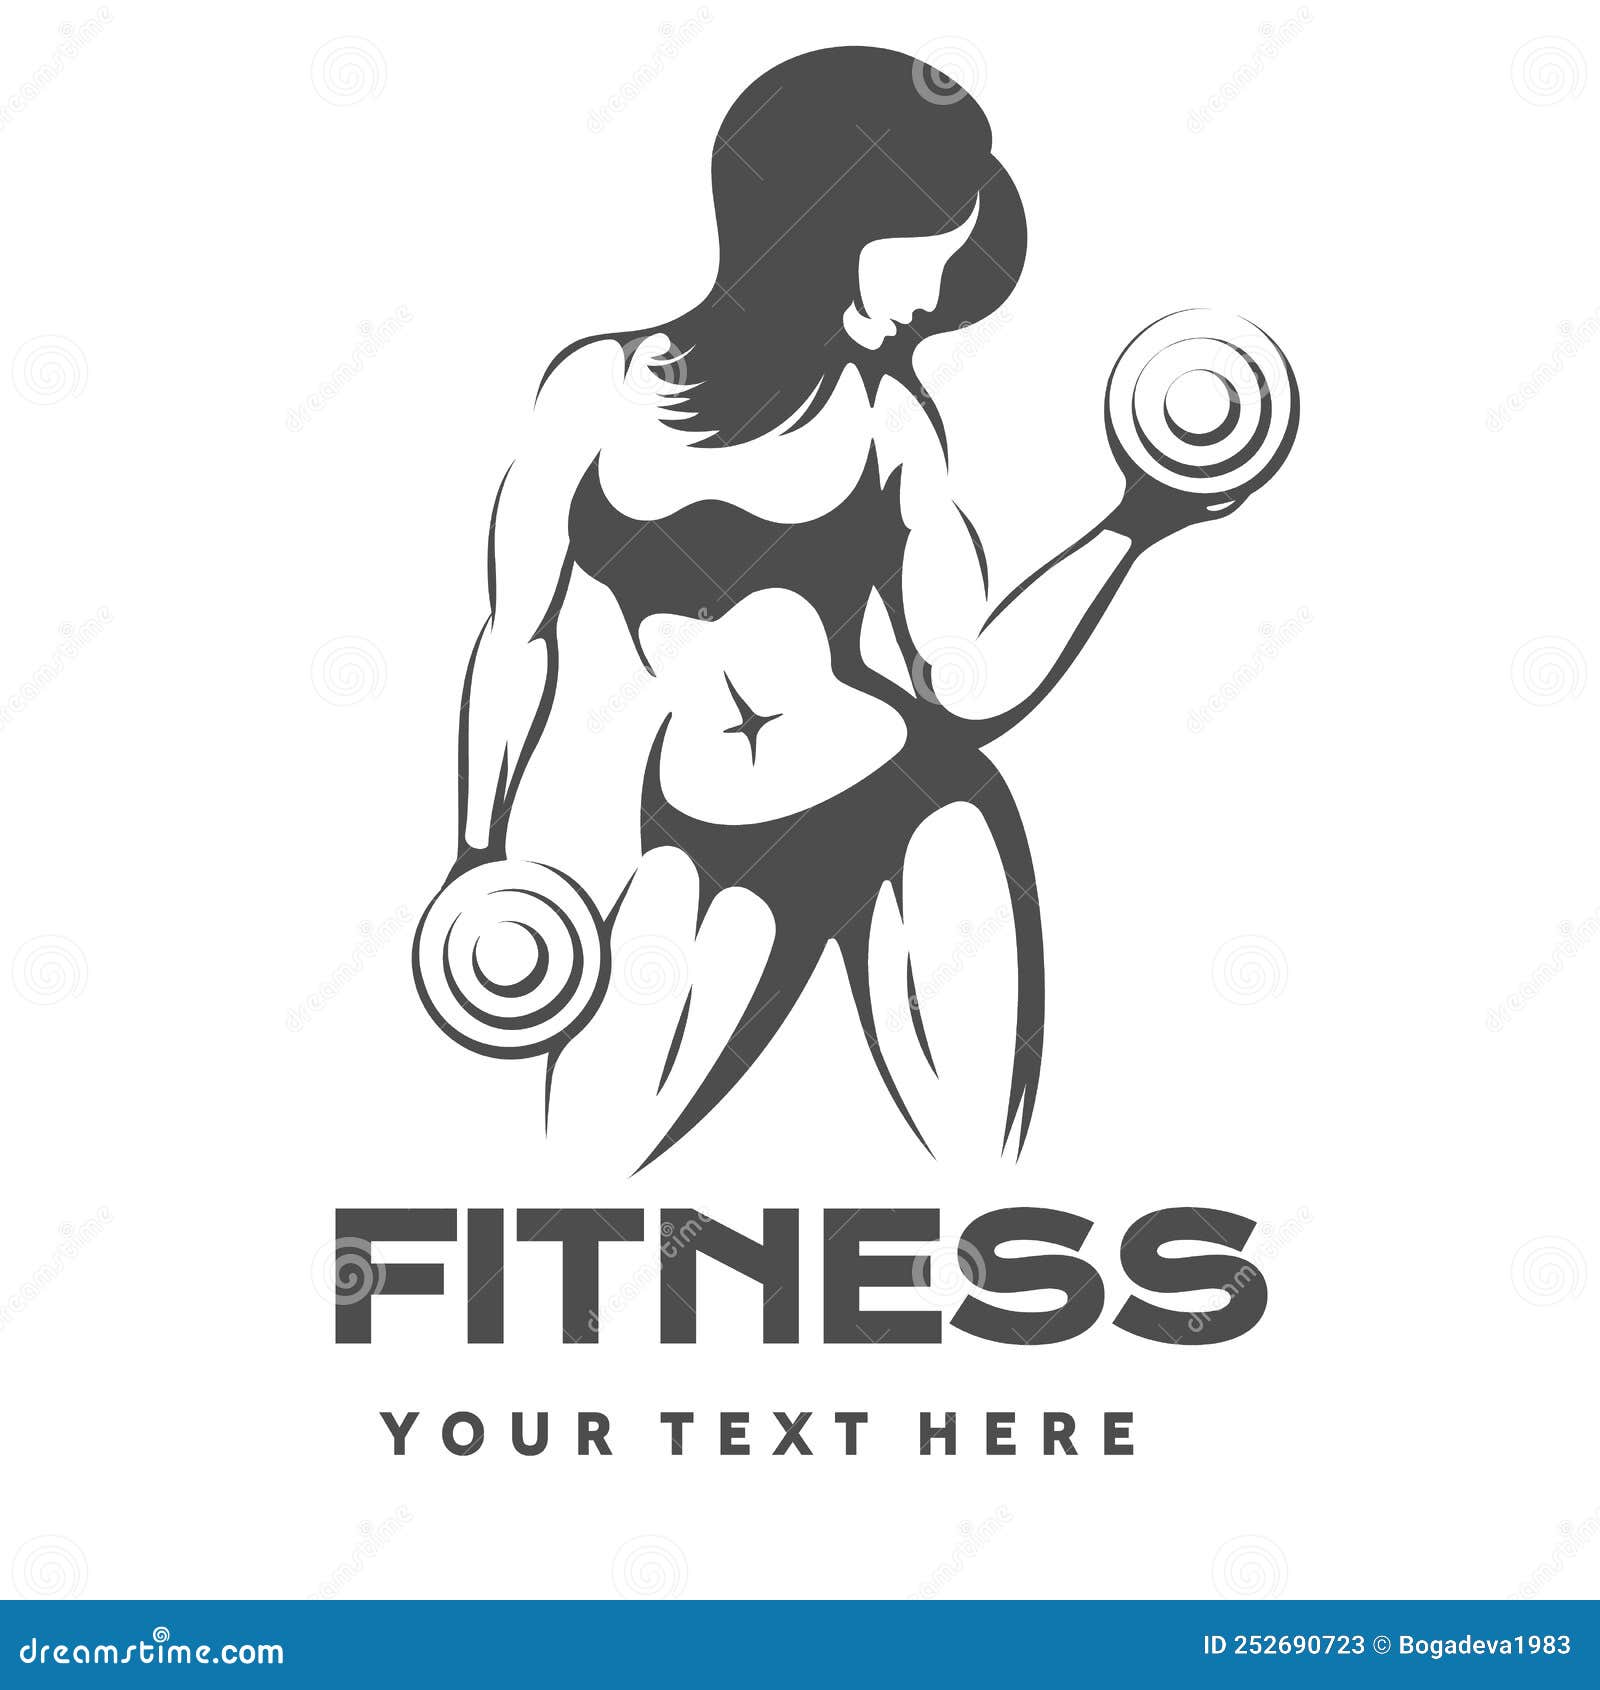 Fitness Logo Design with Woman Silhouette Holding Weight Stock